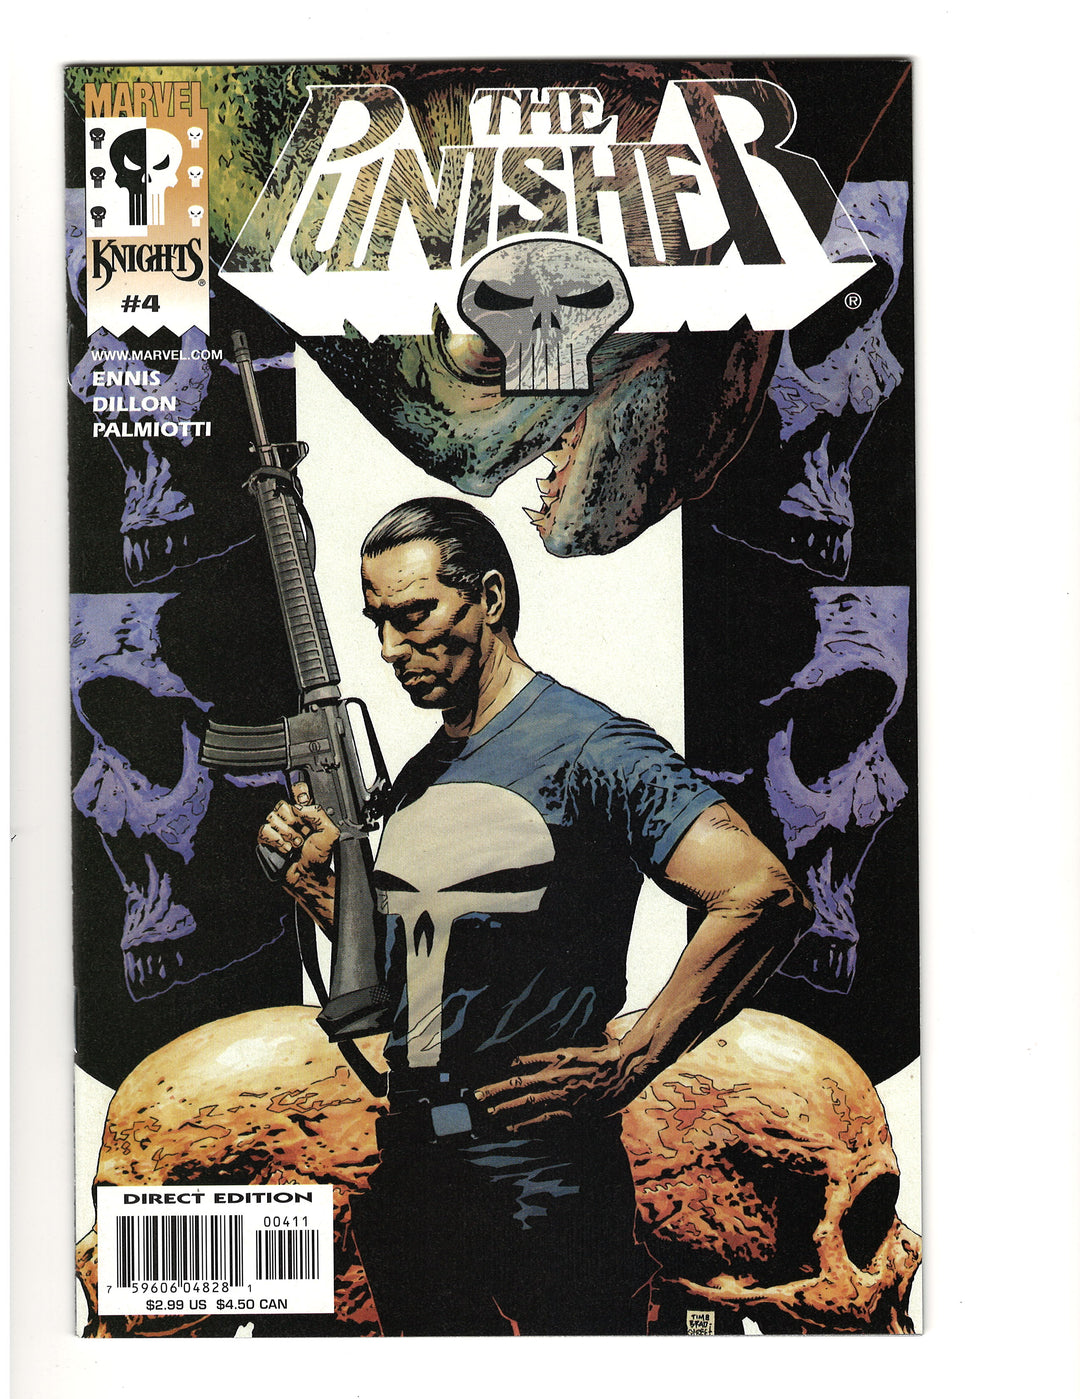 Lot of 5 Punisher (2000) Marvel Knights Comic Books #1 2 3 4 5 Ennis Run OXL-01